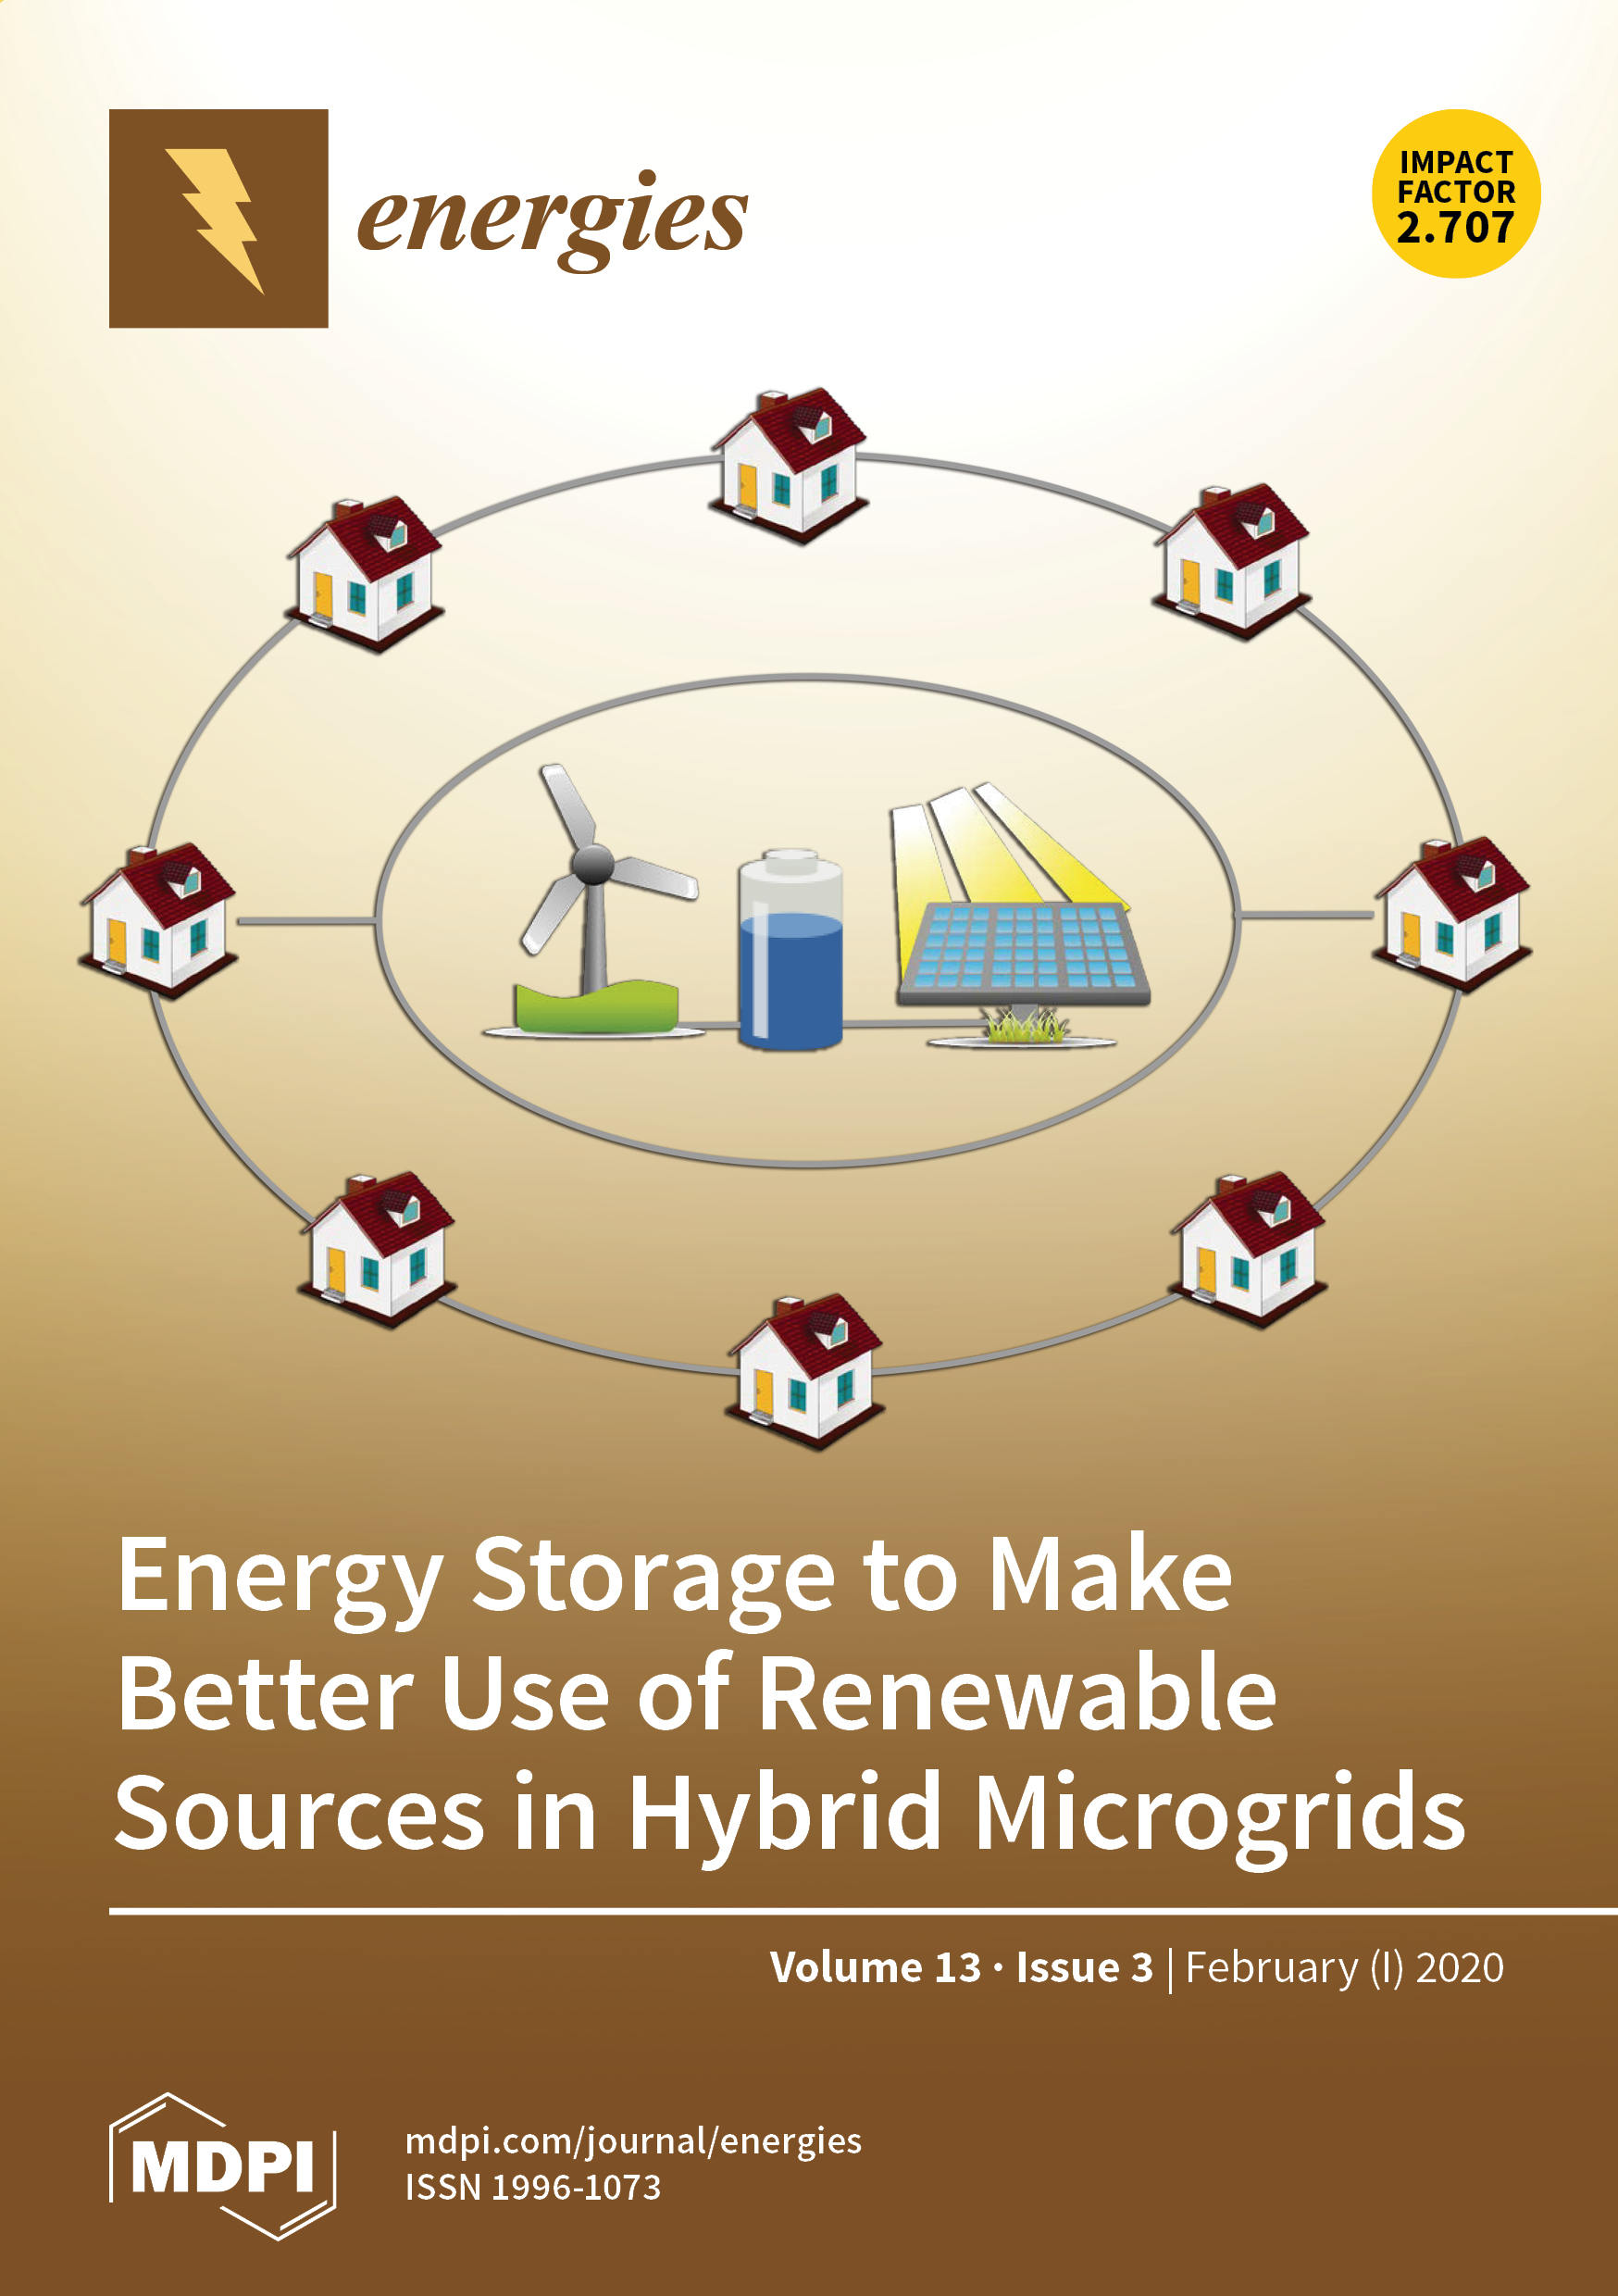 https://www.mdpi.com/files/uploaded/covers/energies/big_cover-energies-v13-i3.png